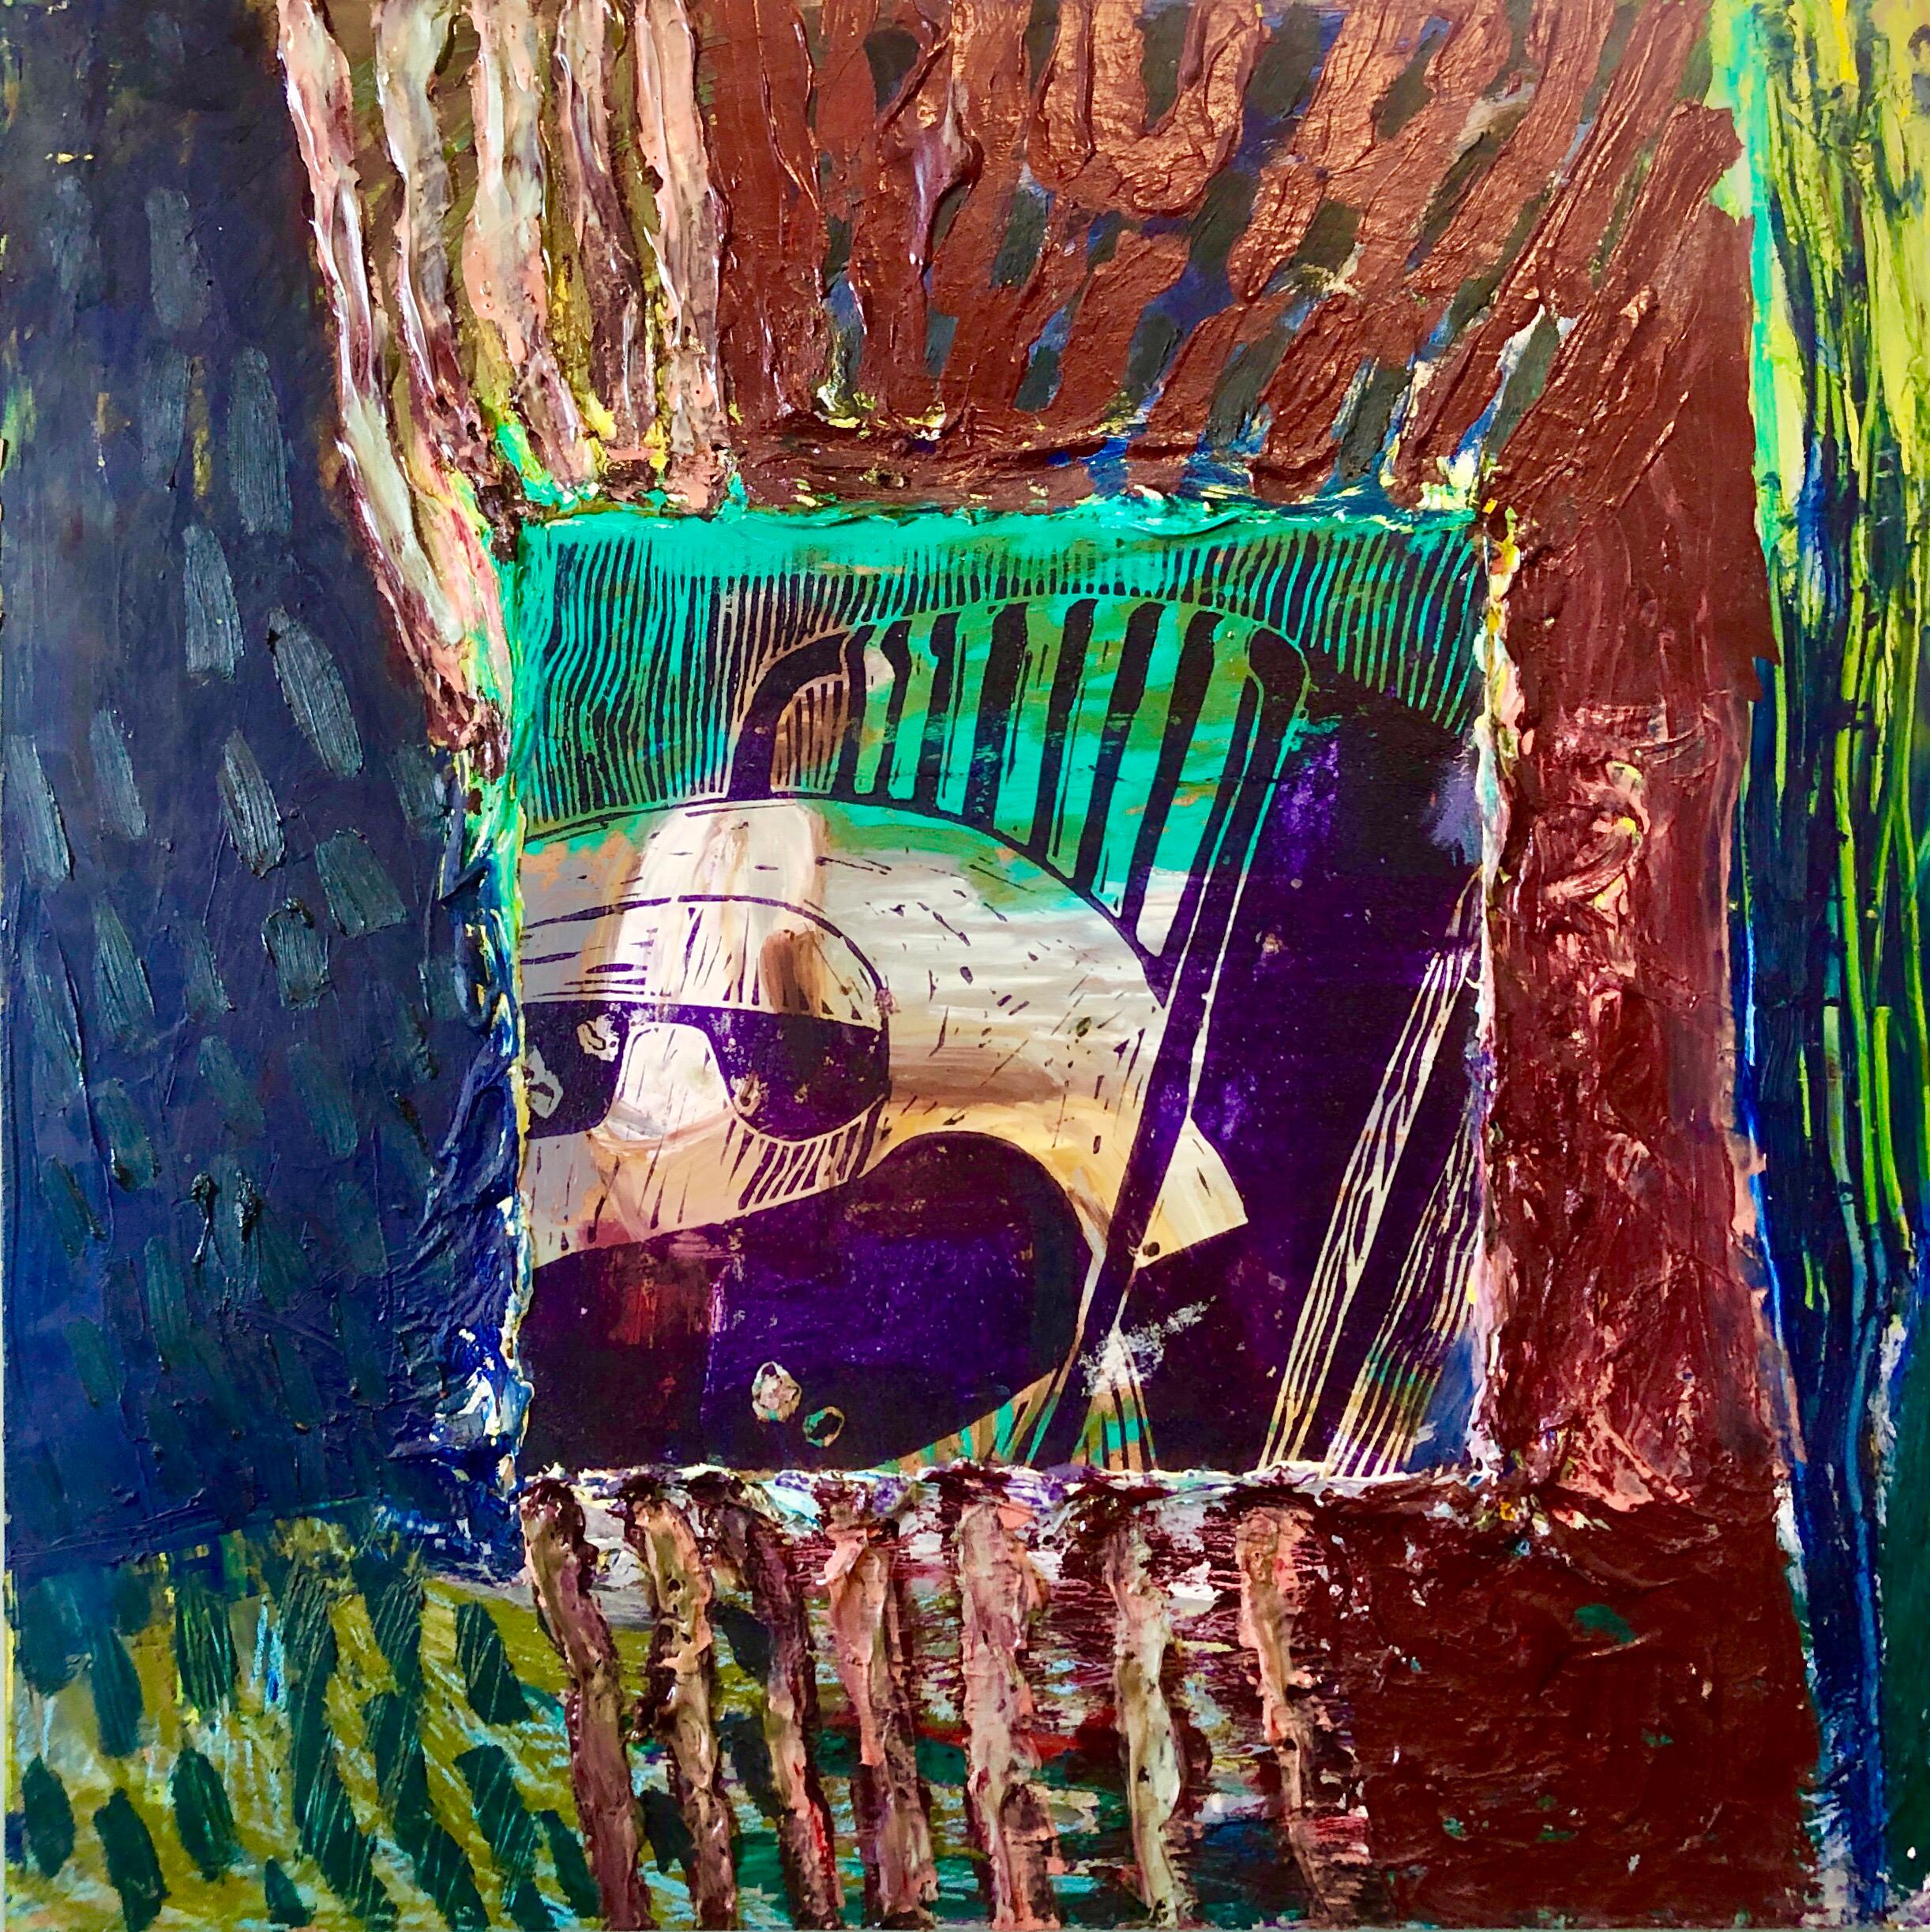 Her Grandson, Mixed Media Painting Collage Wall Construction FIgural Abstraction